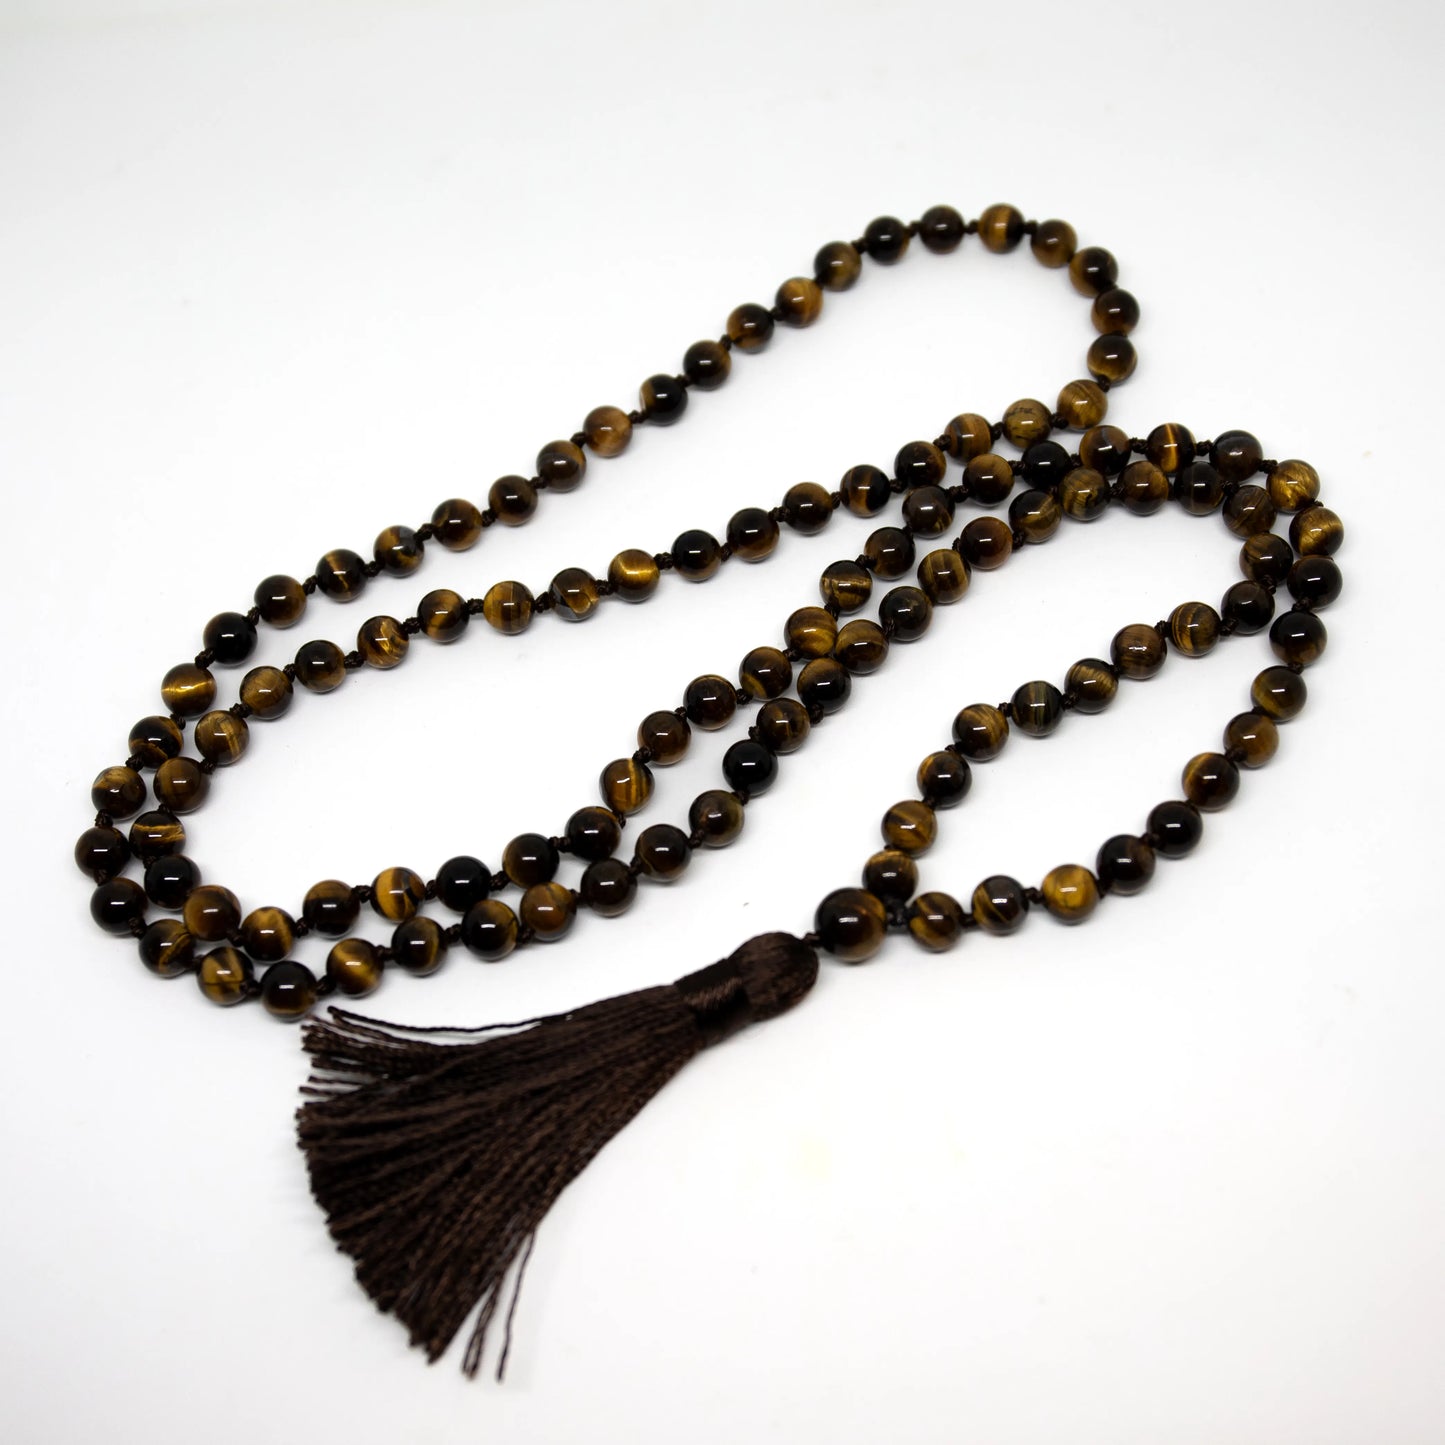 Tiger's Eye Knotted 108 Bead Mala - Prayer Beads - 8mm (1 Pack)